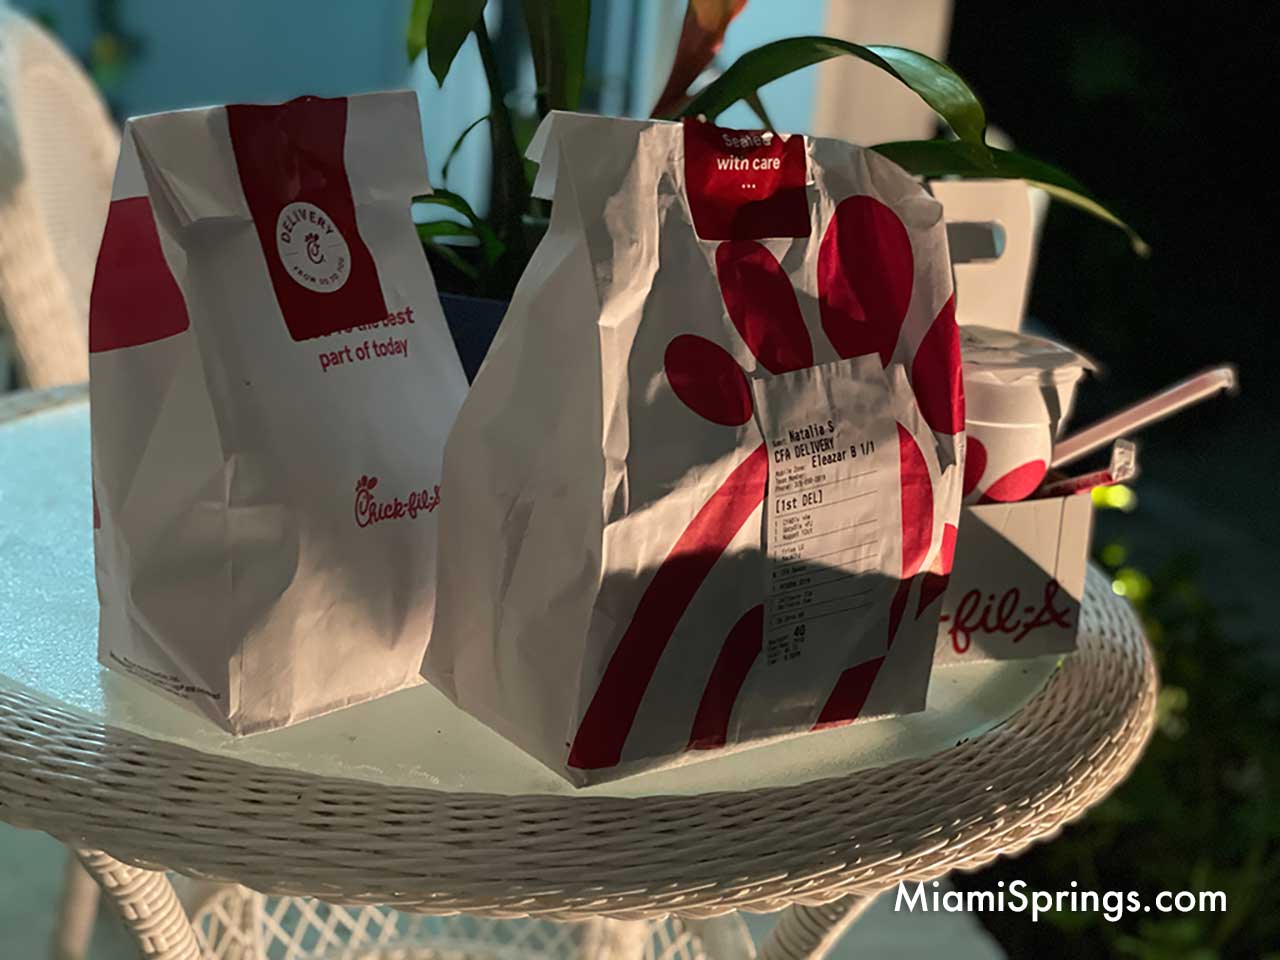 Chick-fil-A Welcome back to school gift packages for schools